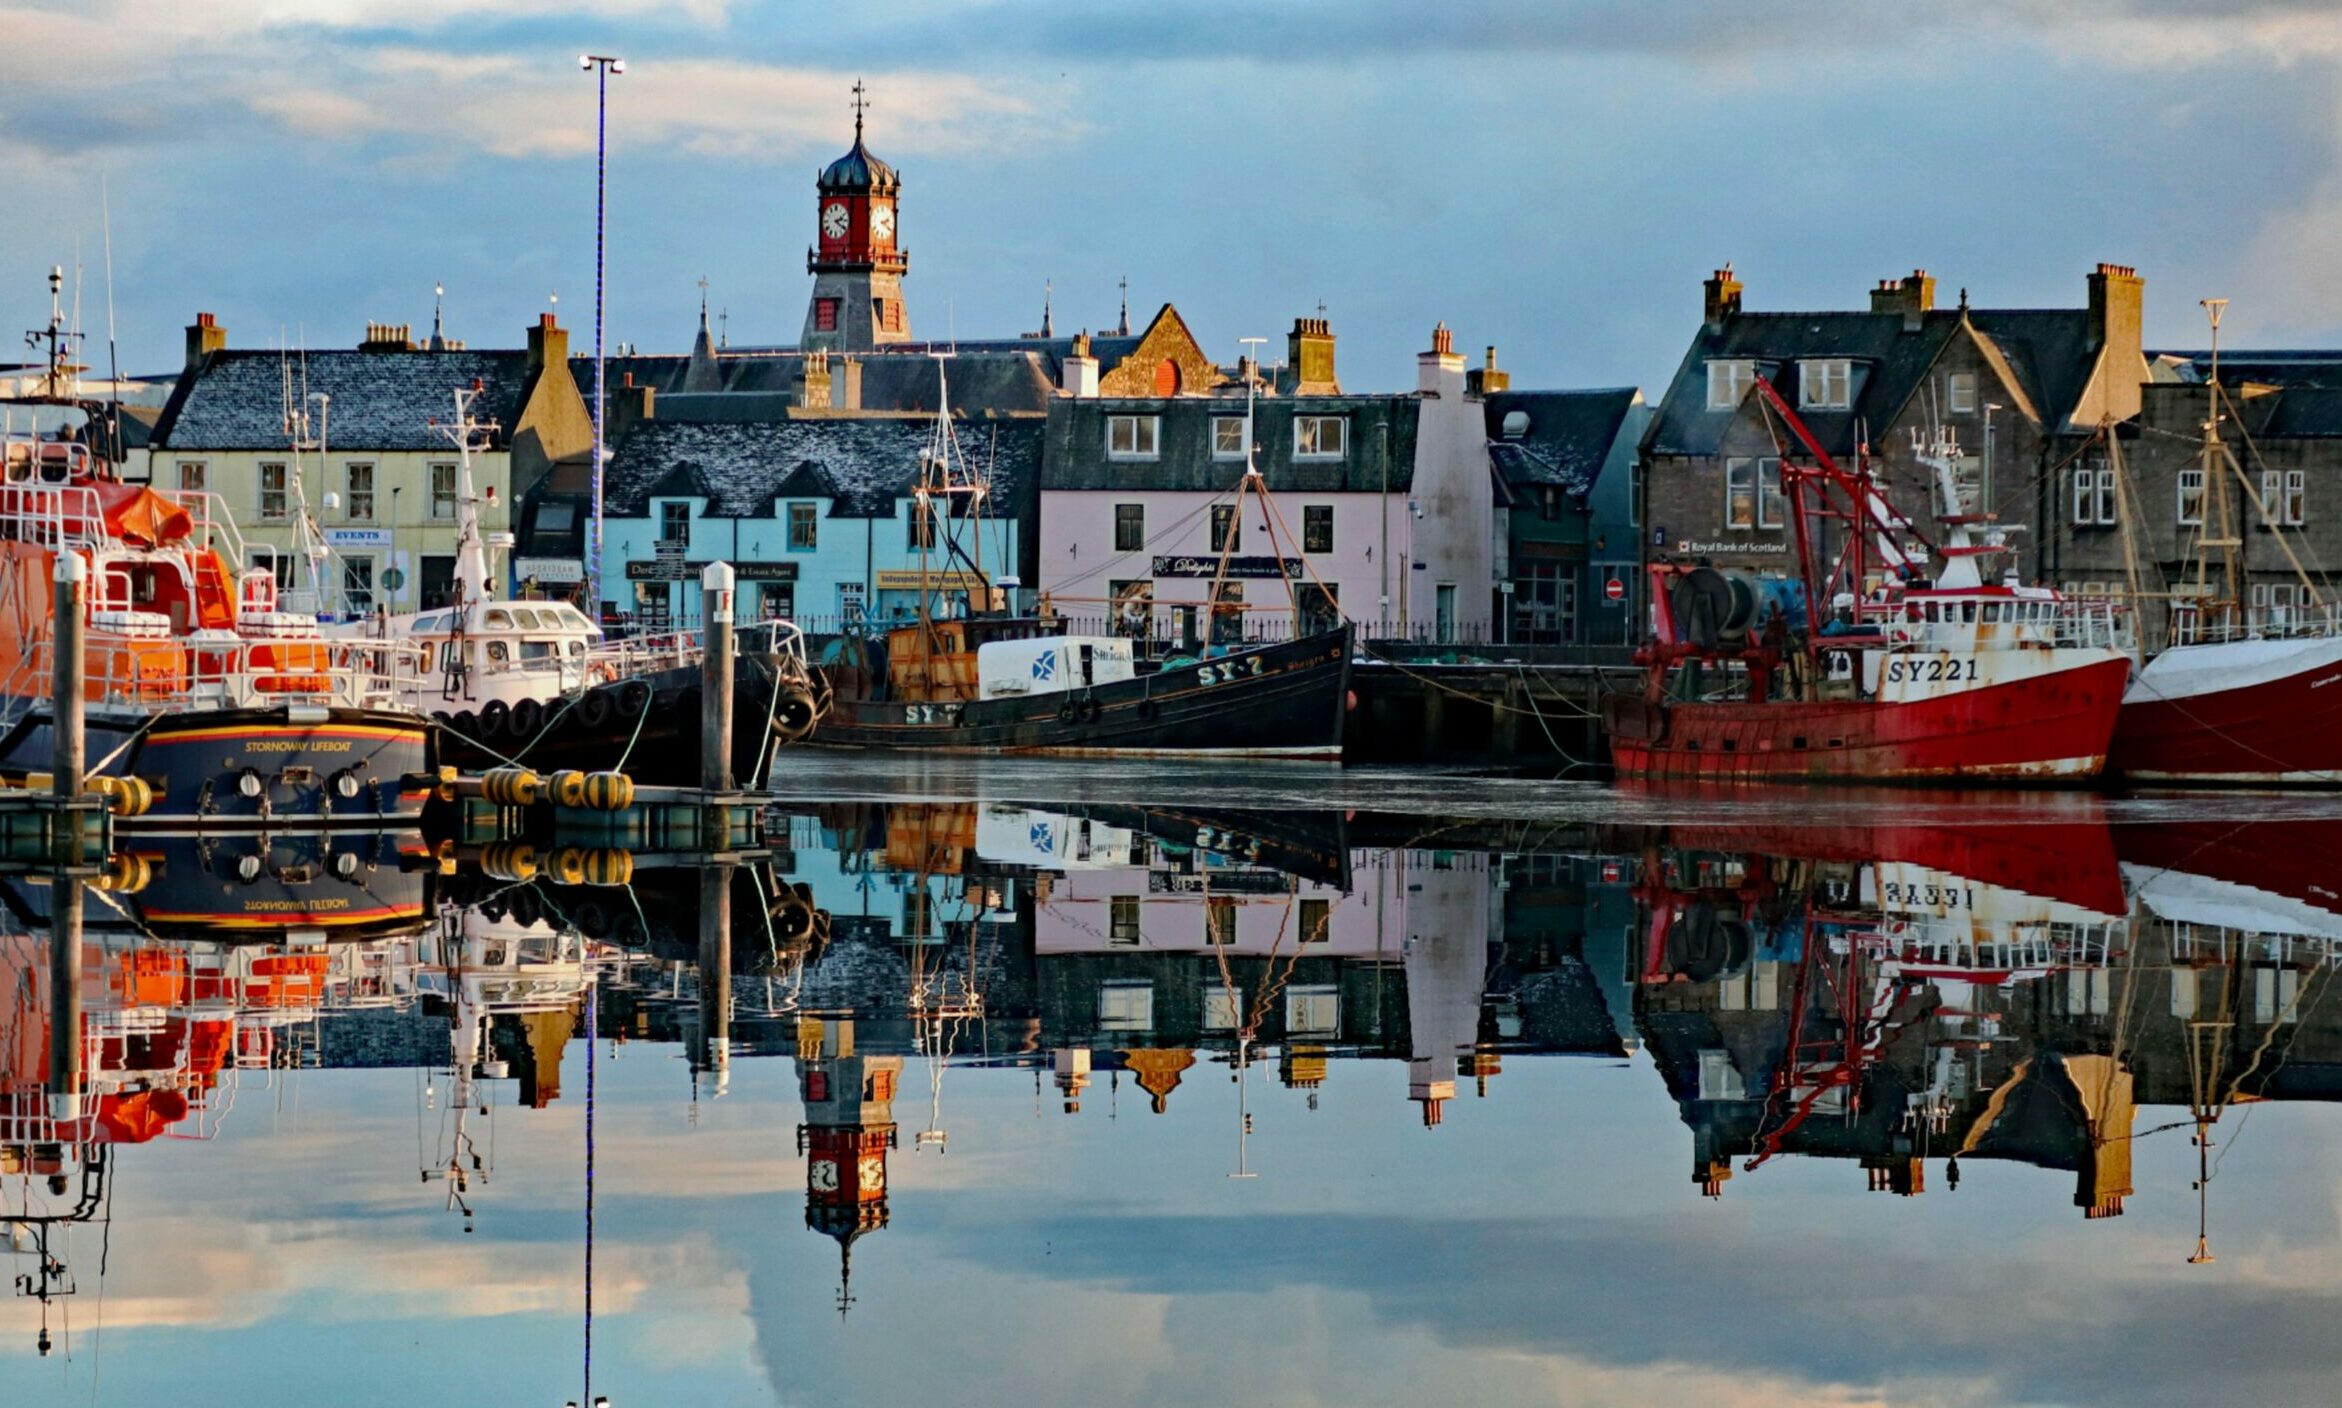 Stornoway on the Isle of Lewis. plenty of colourful houses, with fishing boats in the water in the foreground. This is the main town in the Western Isles.